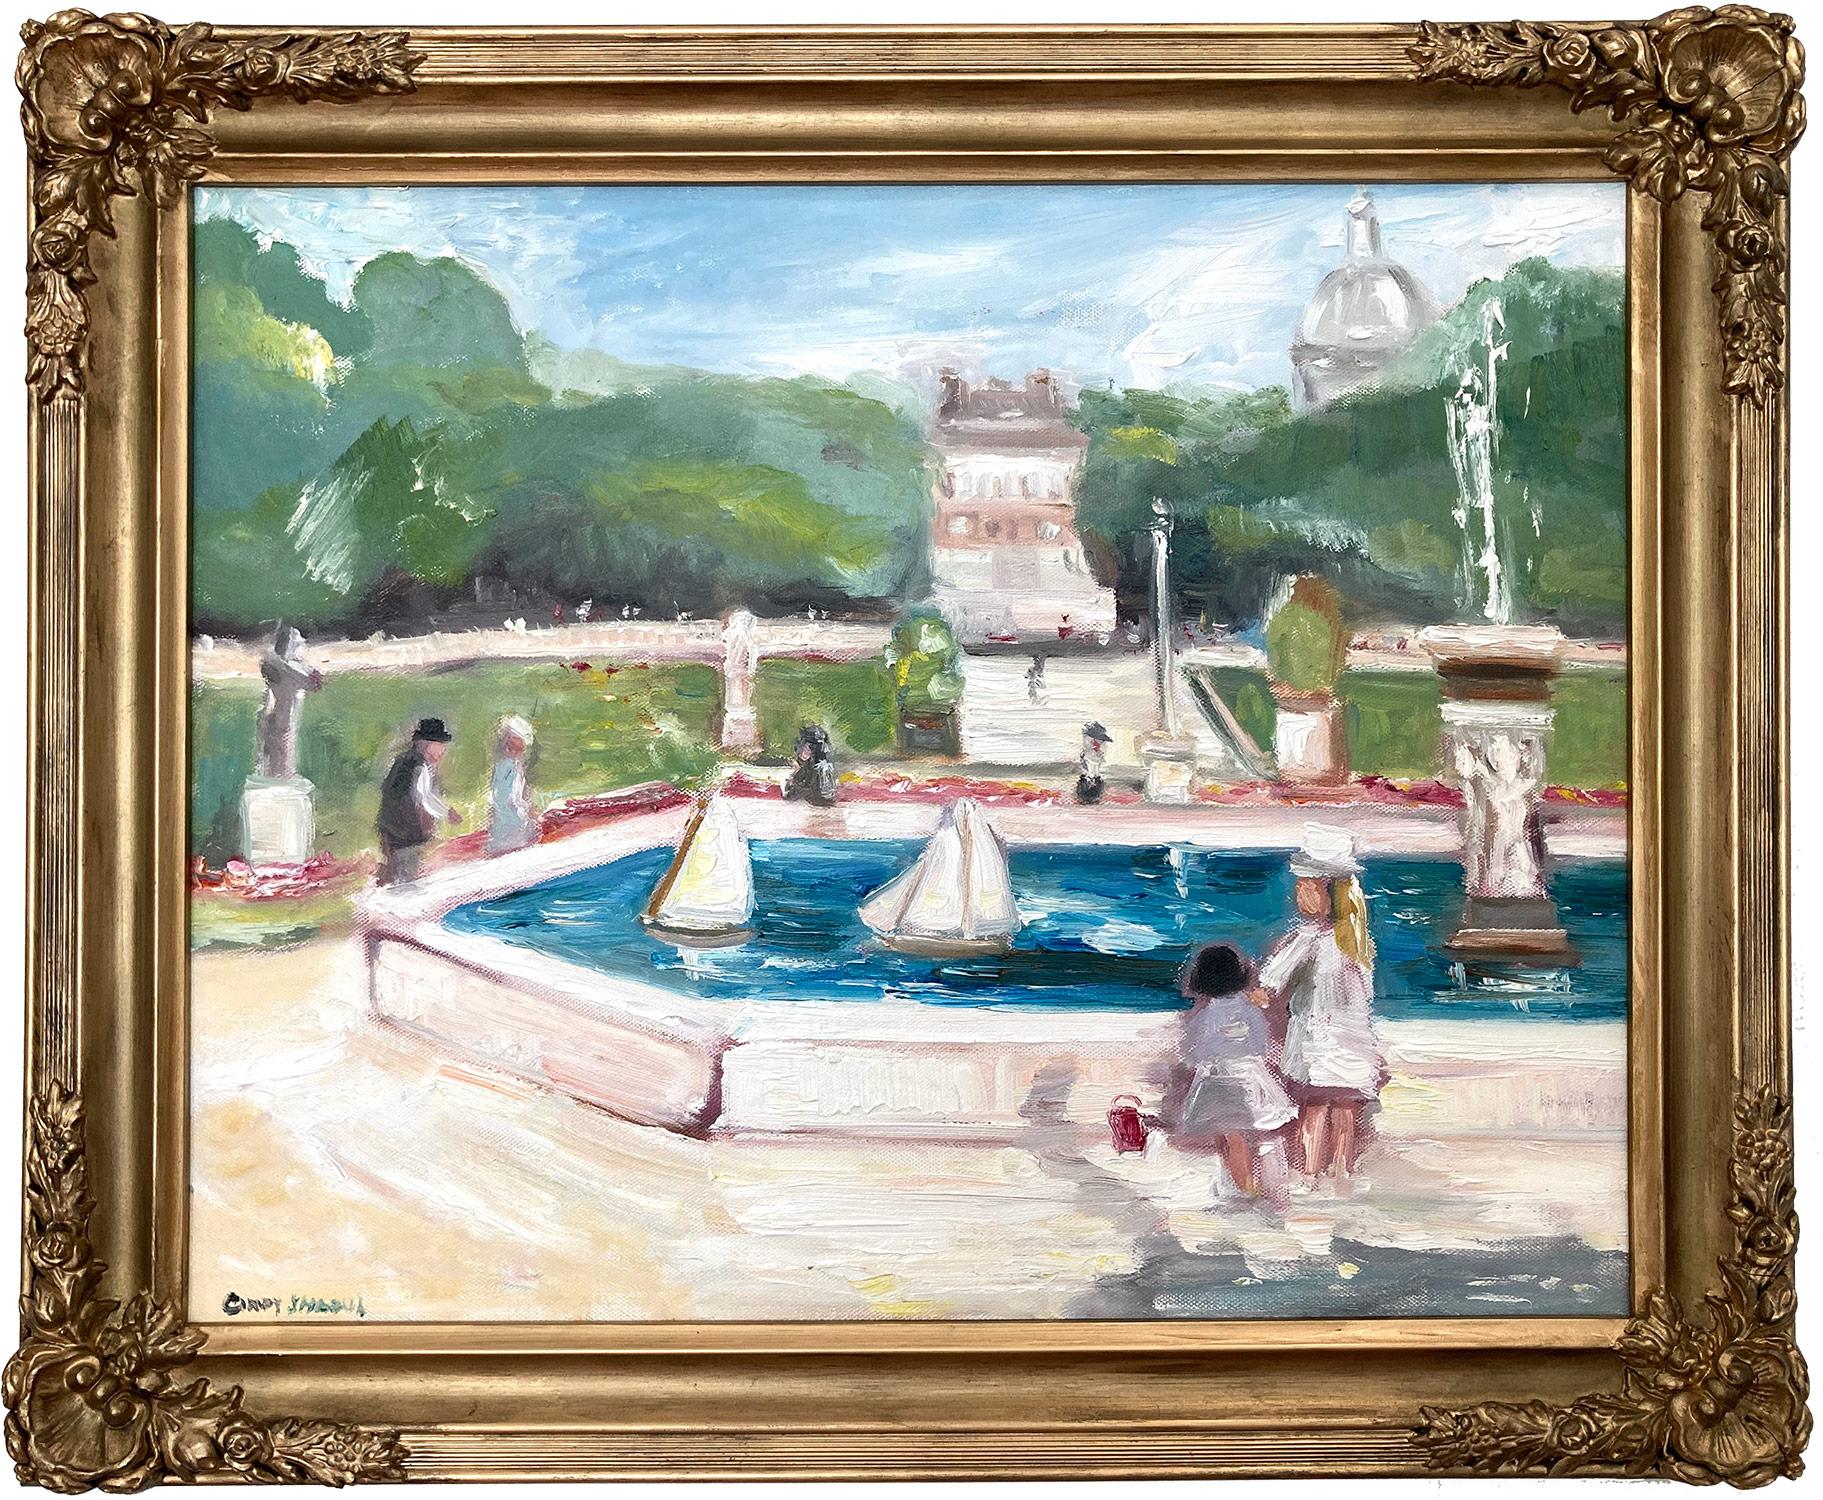 Cindy Shaoul Landscape Painting - "Day at the Jardin De Tuileries" Impressionistic Park Scene style of Jules Herve